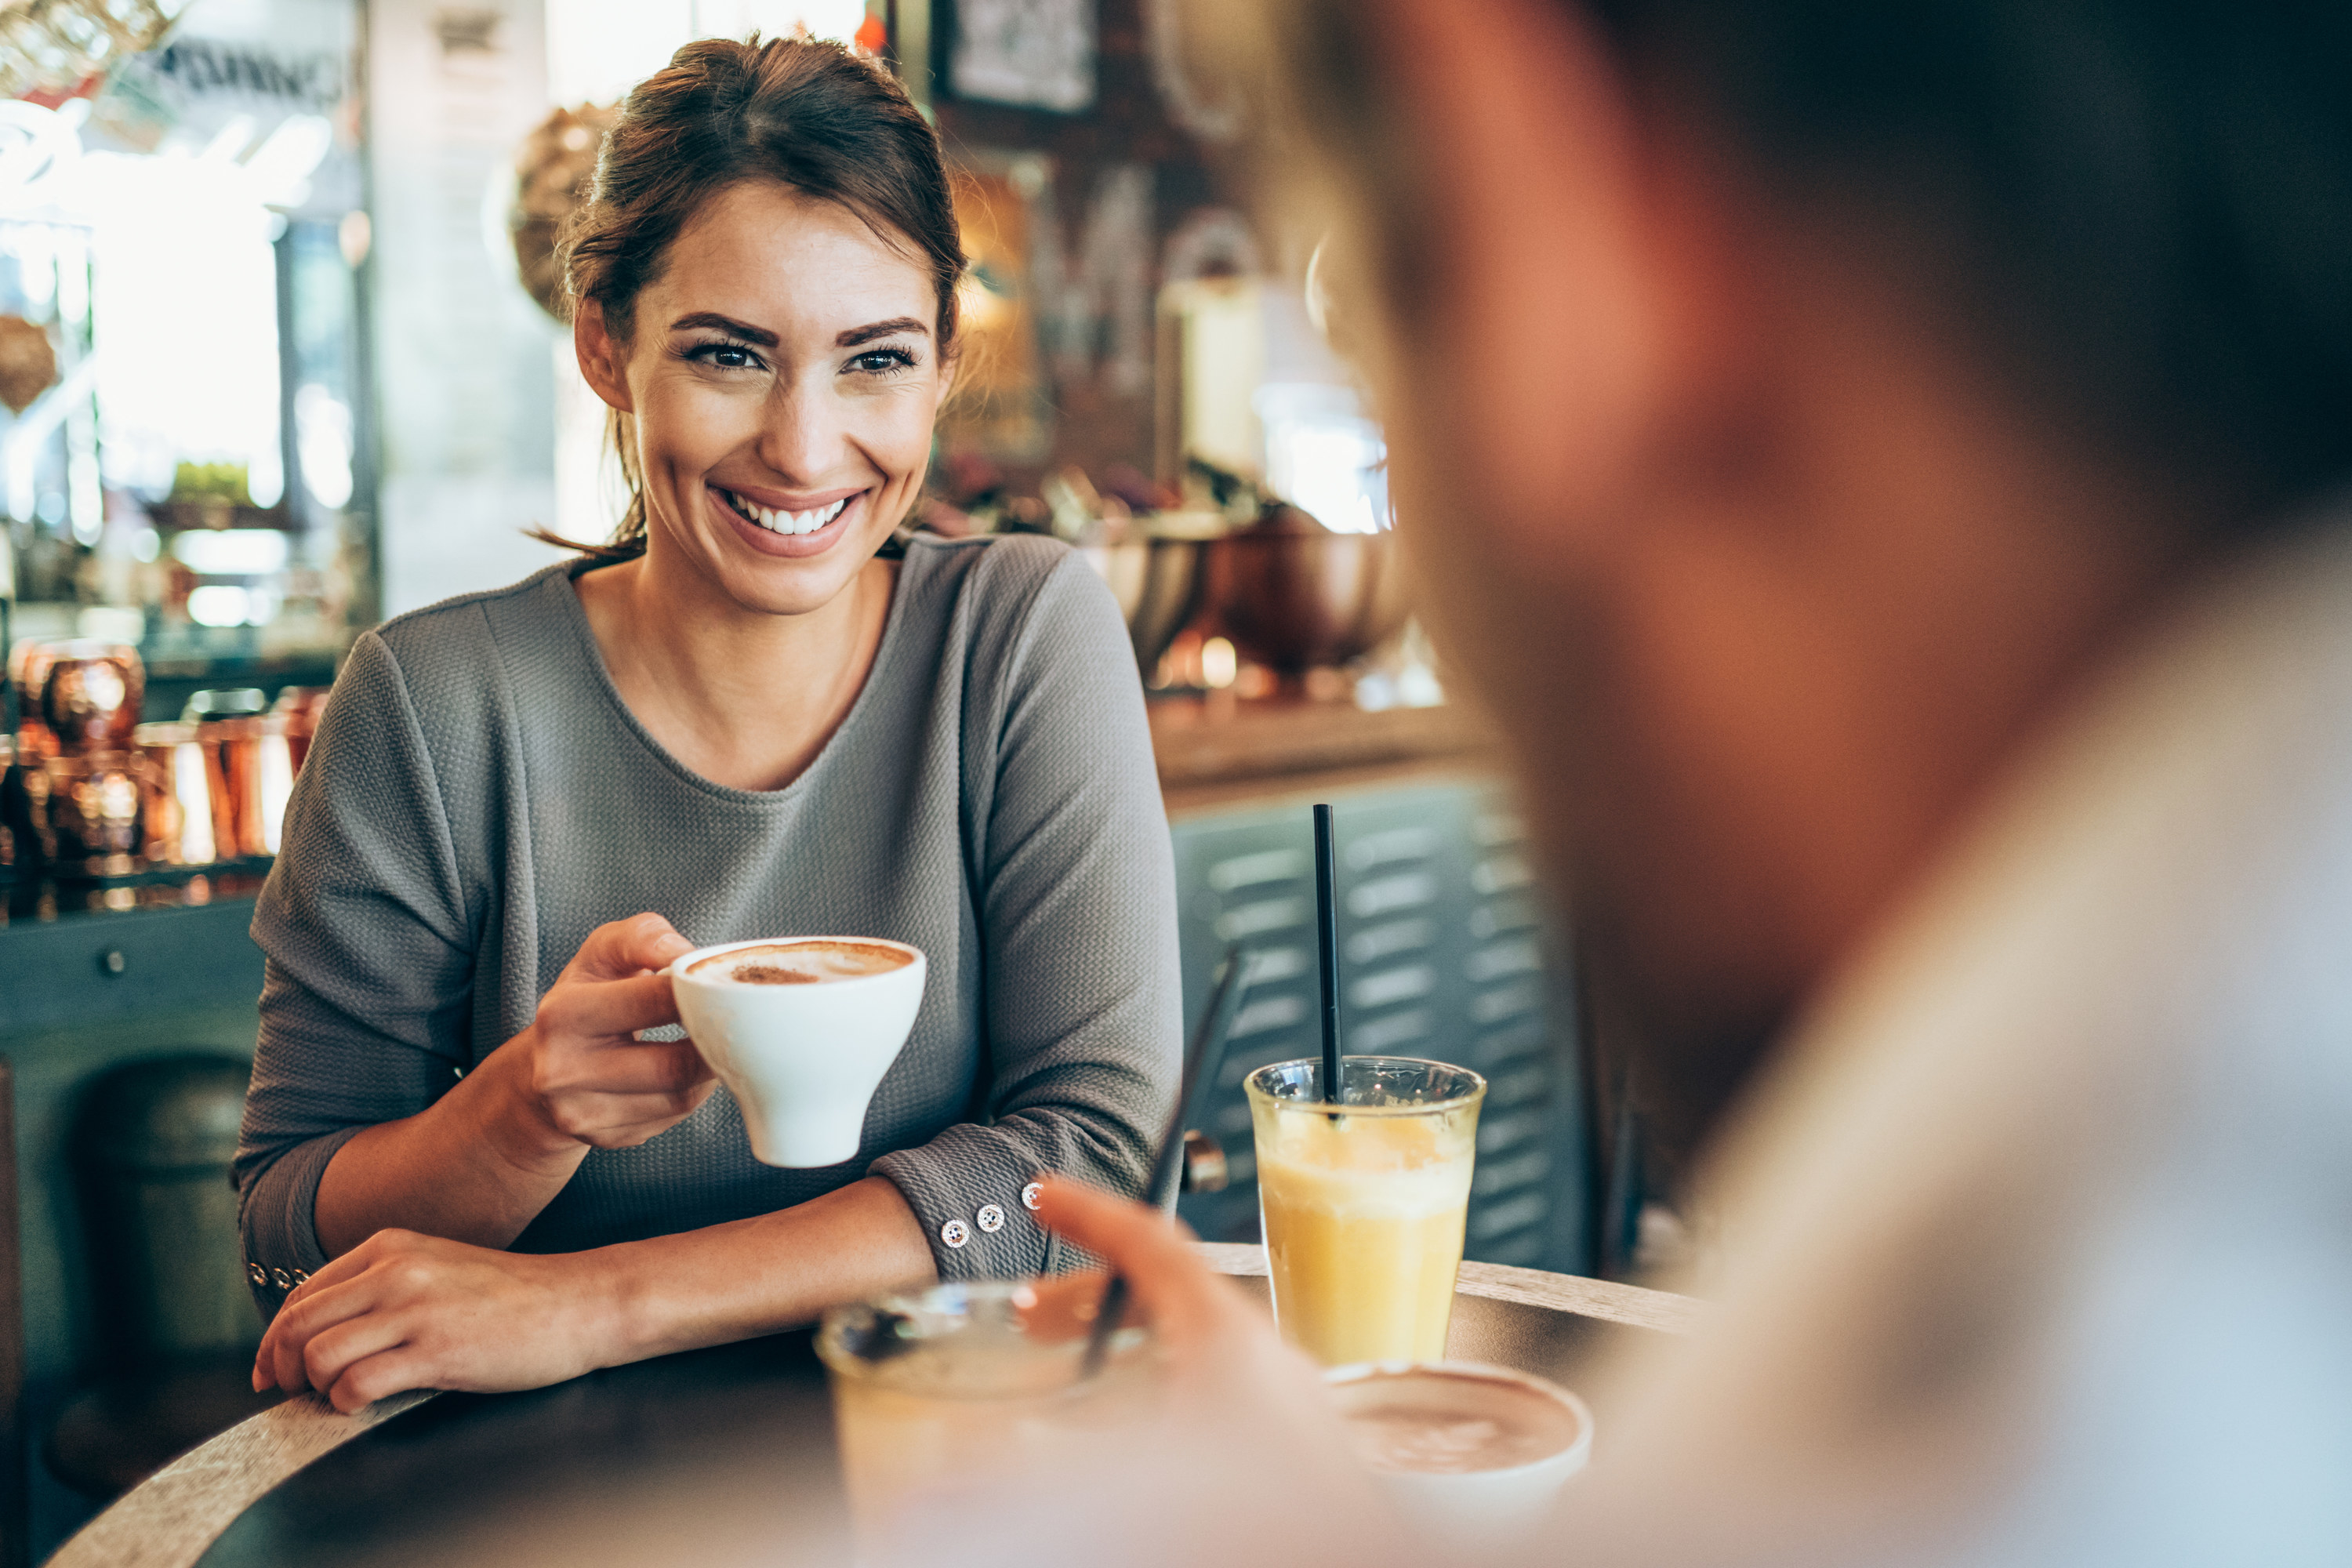 a woman holding a coffee mug smiling at the person across from her